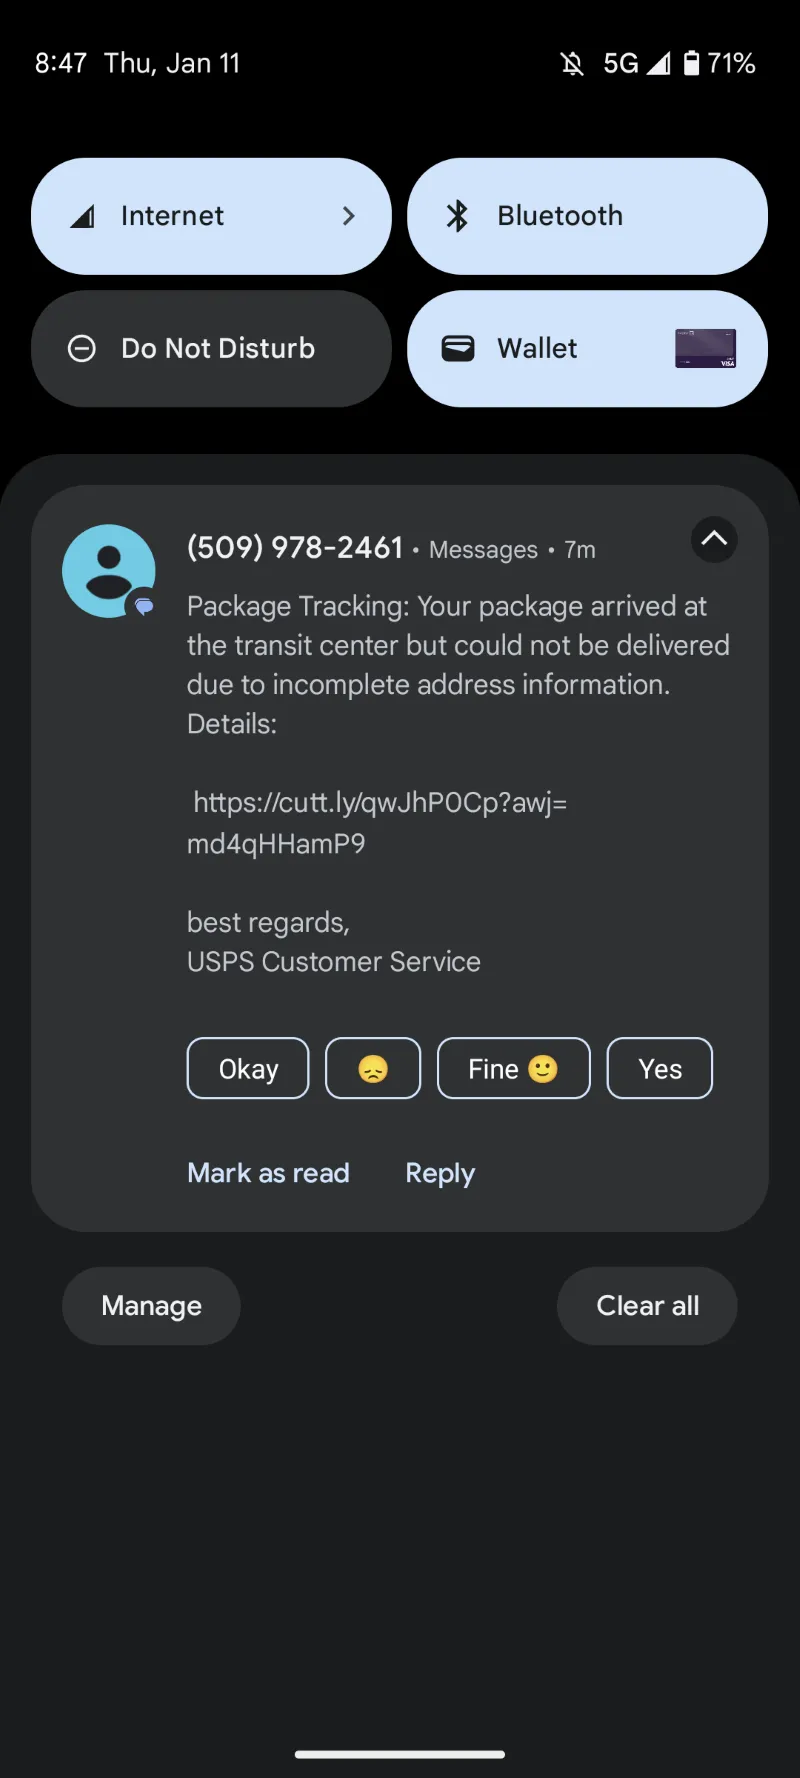 An image of a spam text supposedly from the USPS